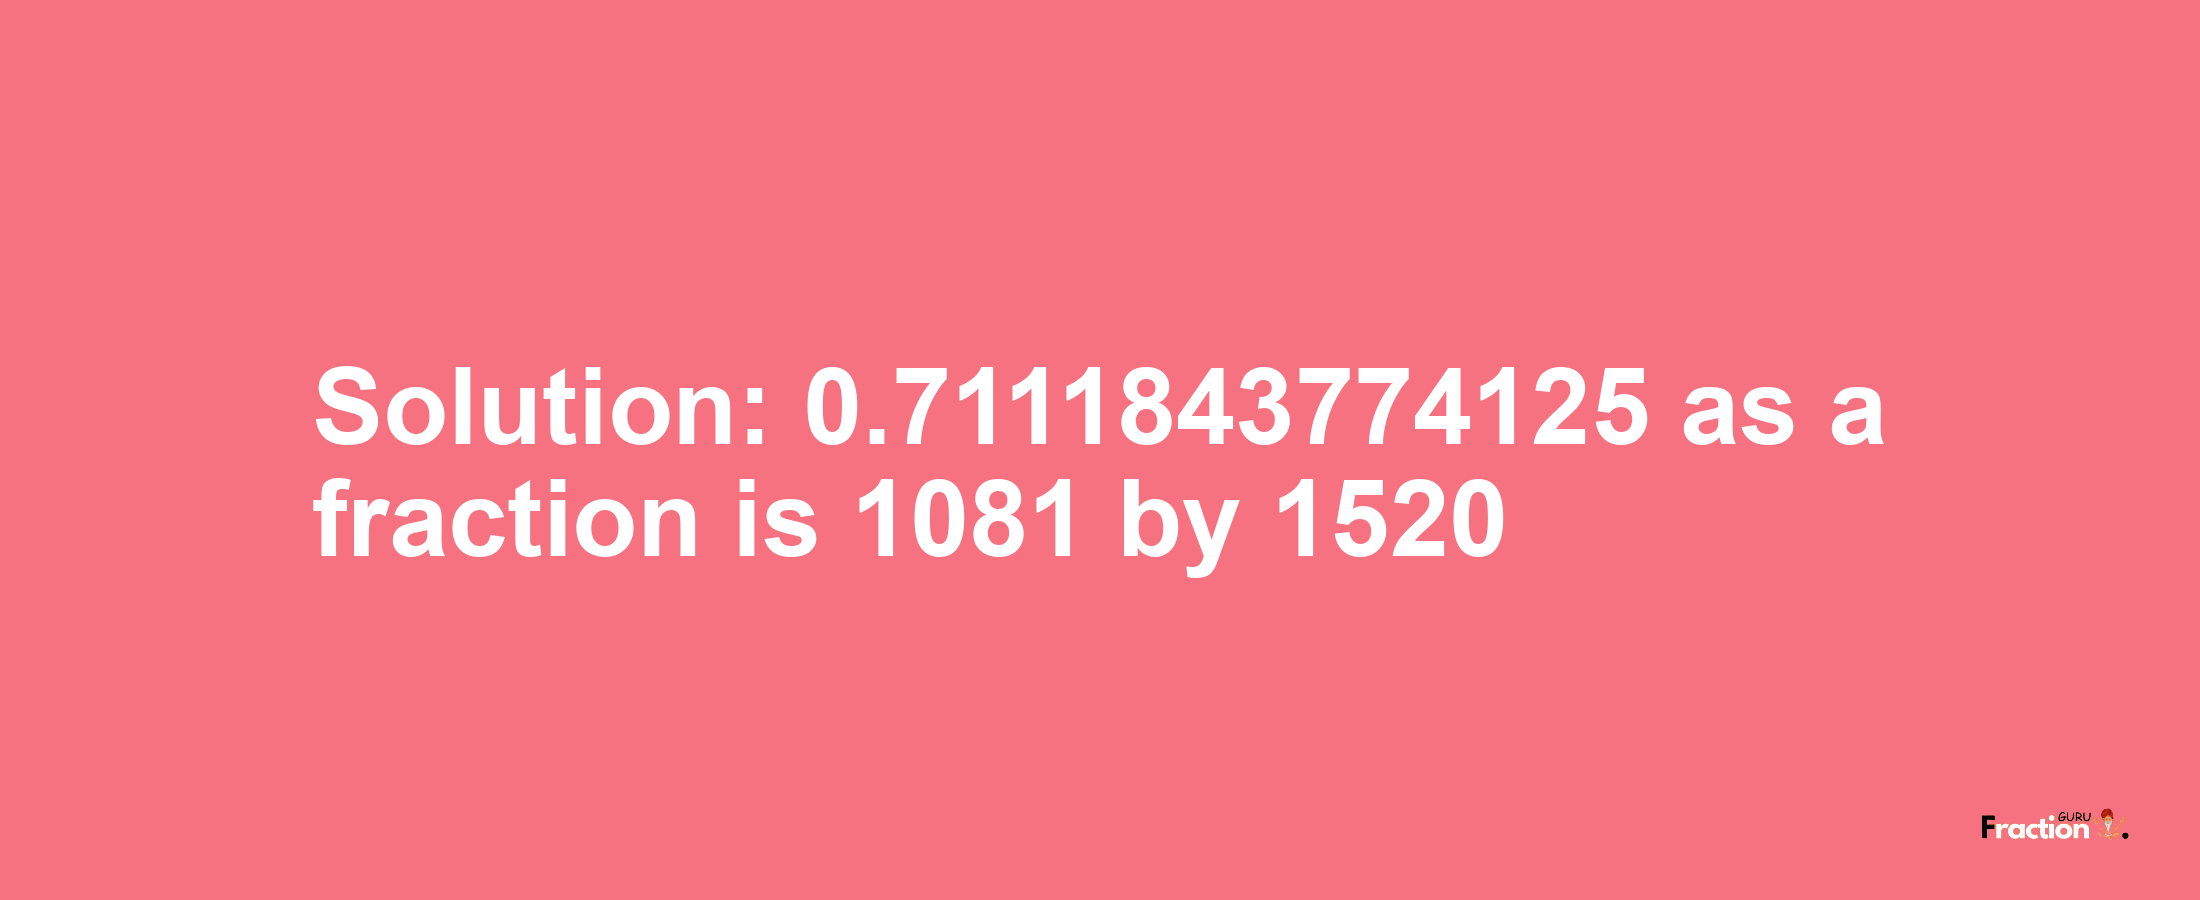 Solution:0.7111843774125 as a fraction is 1081/1520